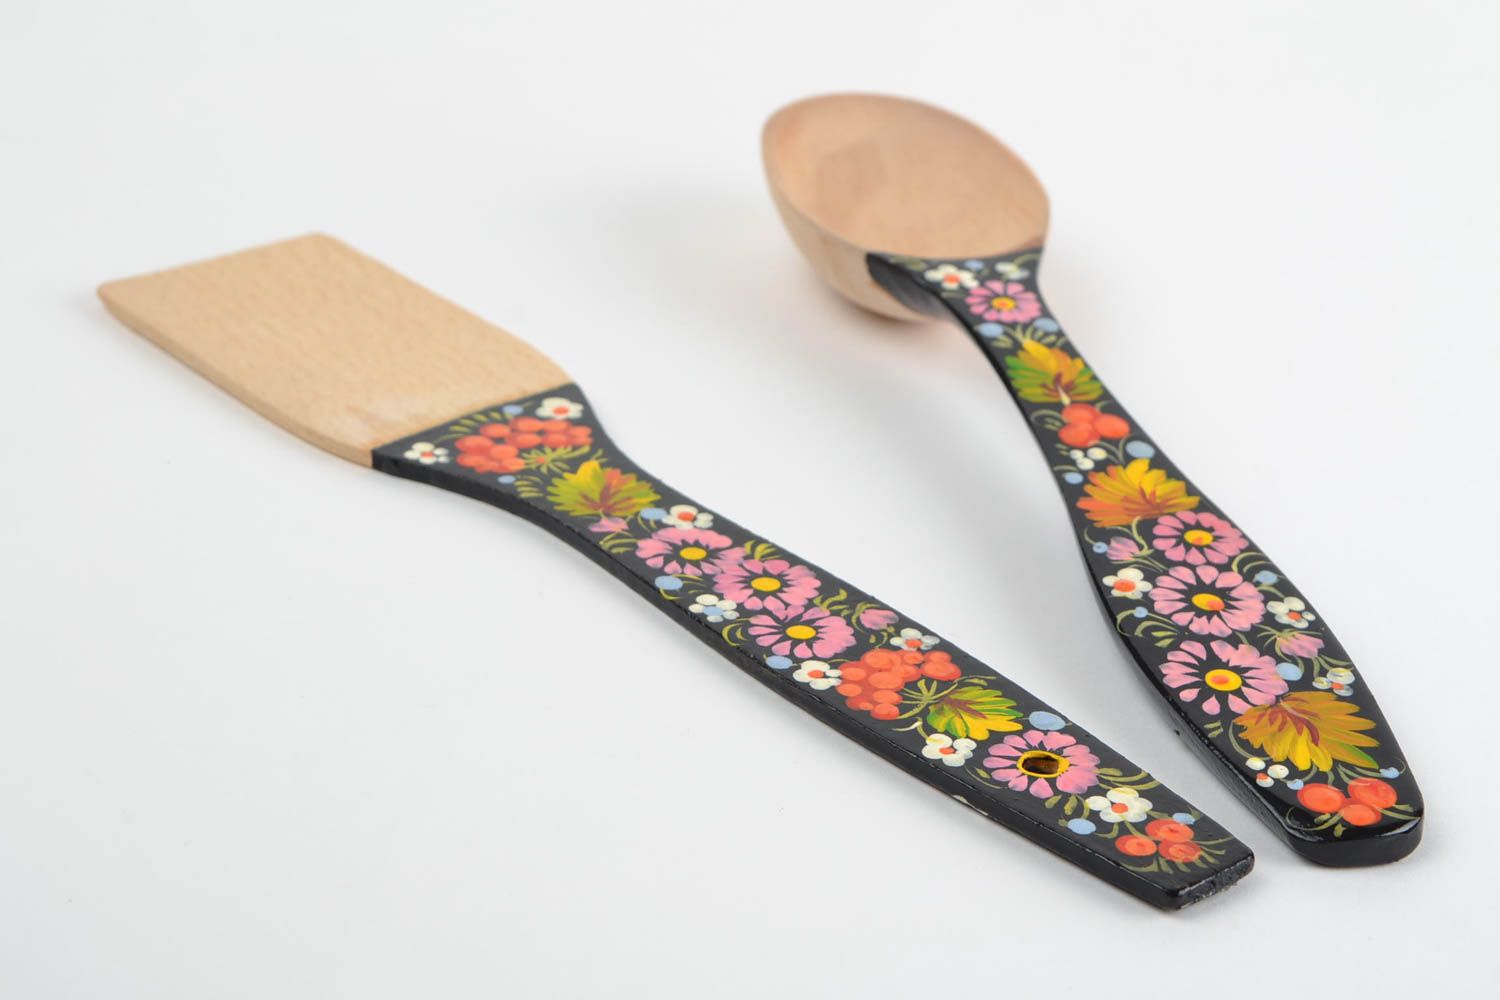 Handmade wooden kitchen set of 2 spatula and spoon unique decorative cook tools photo 2